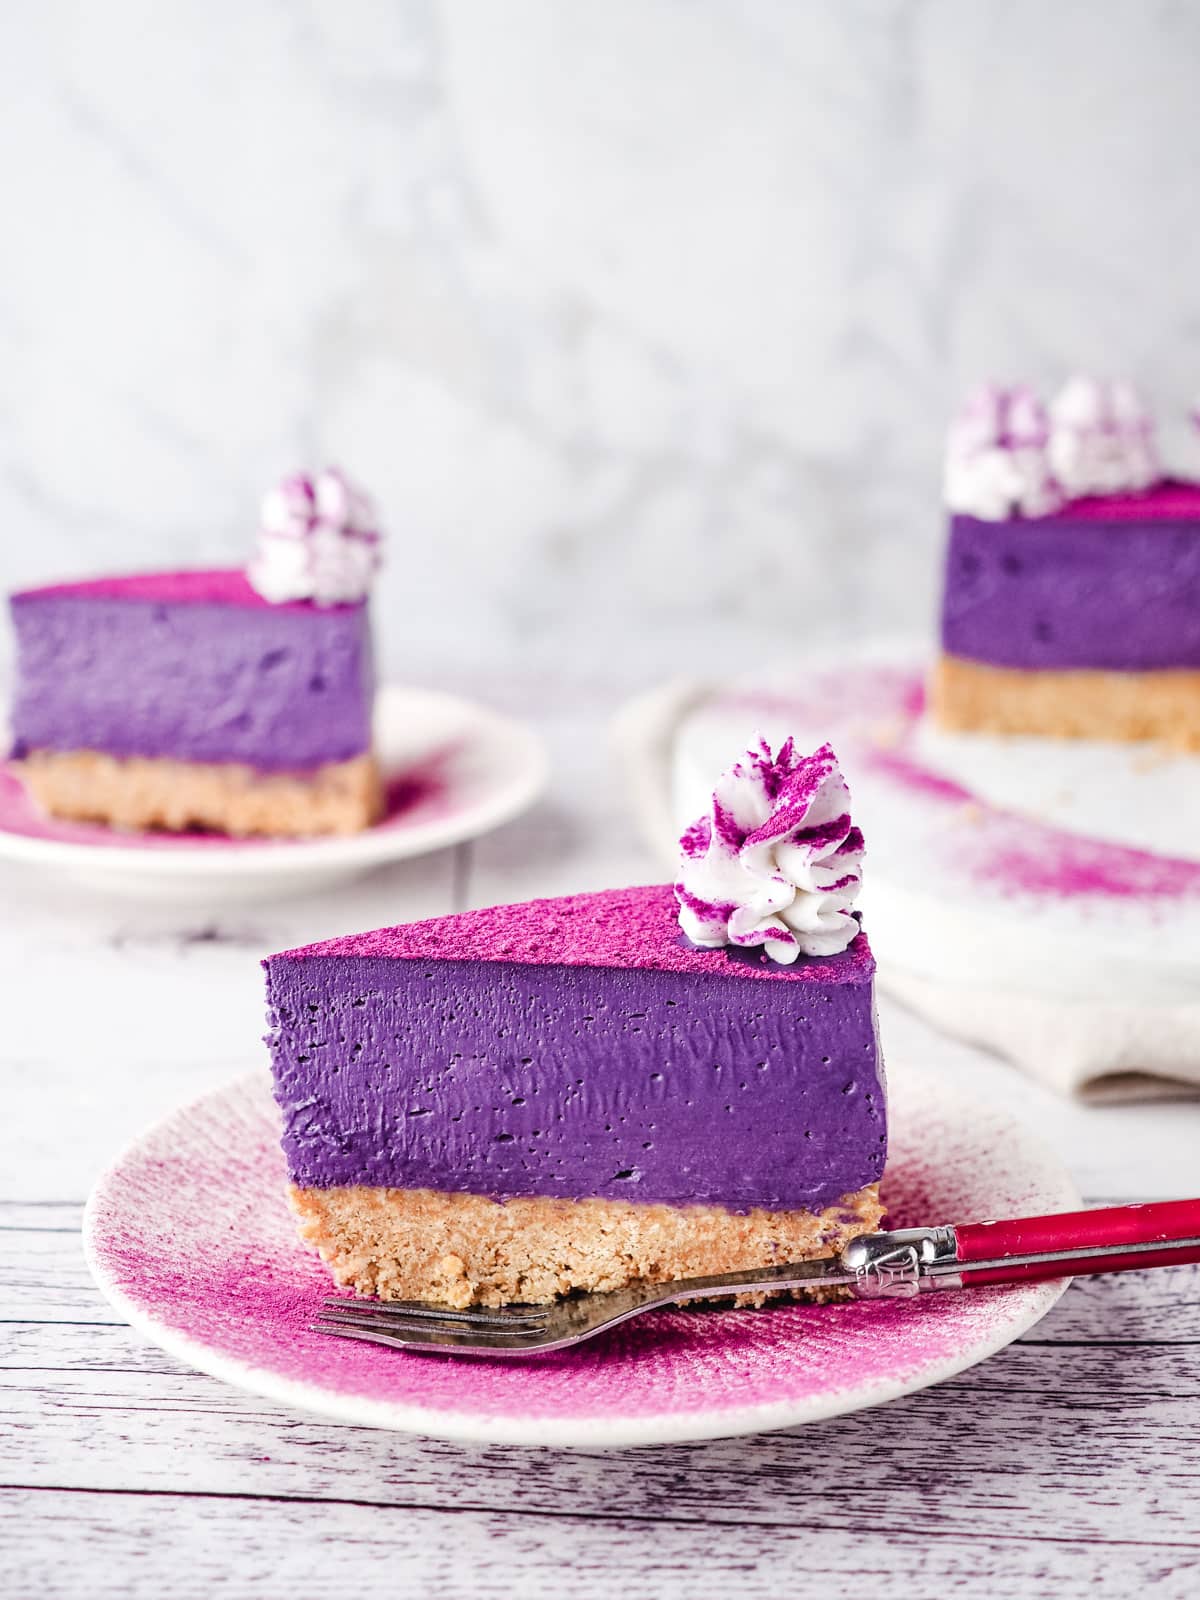 Slice of ube cheesecake on a plate dusted with ube powder, with a fork on the sideand rest of cake and another slice of cake in the background.